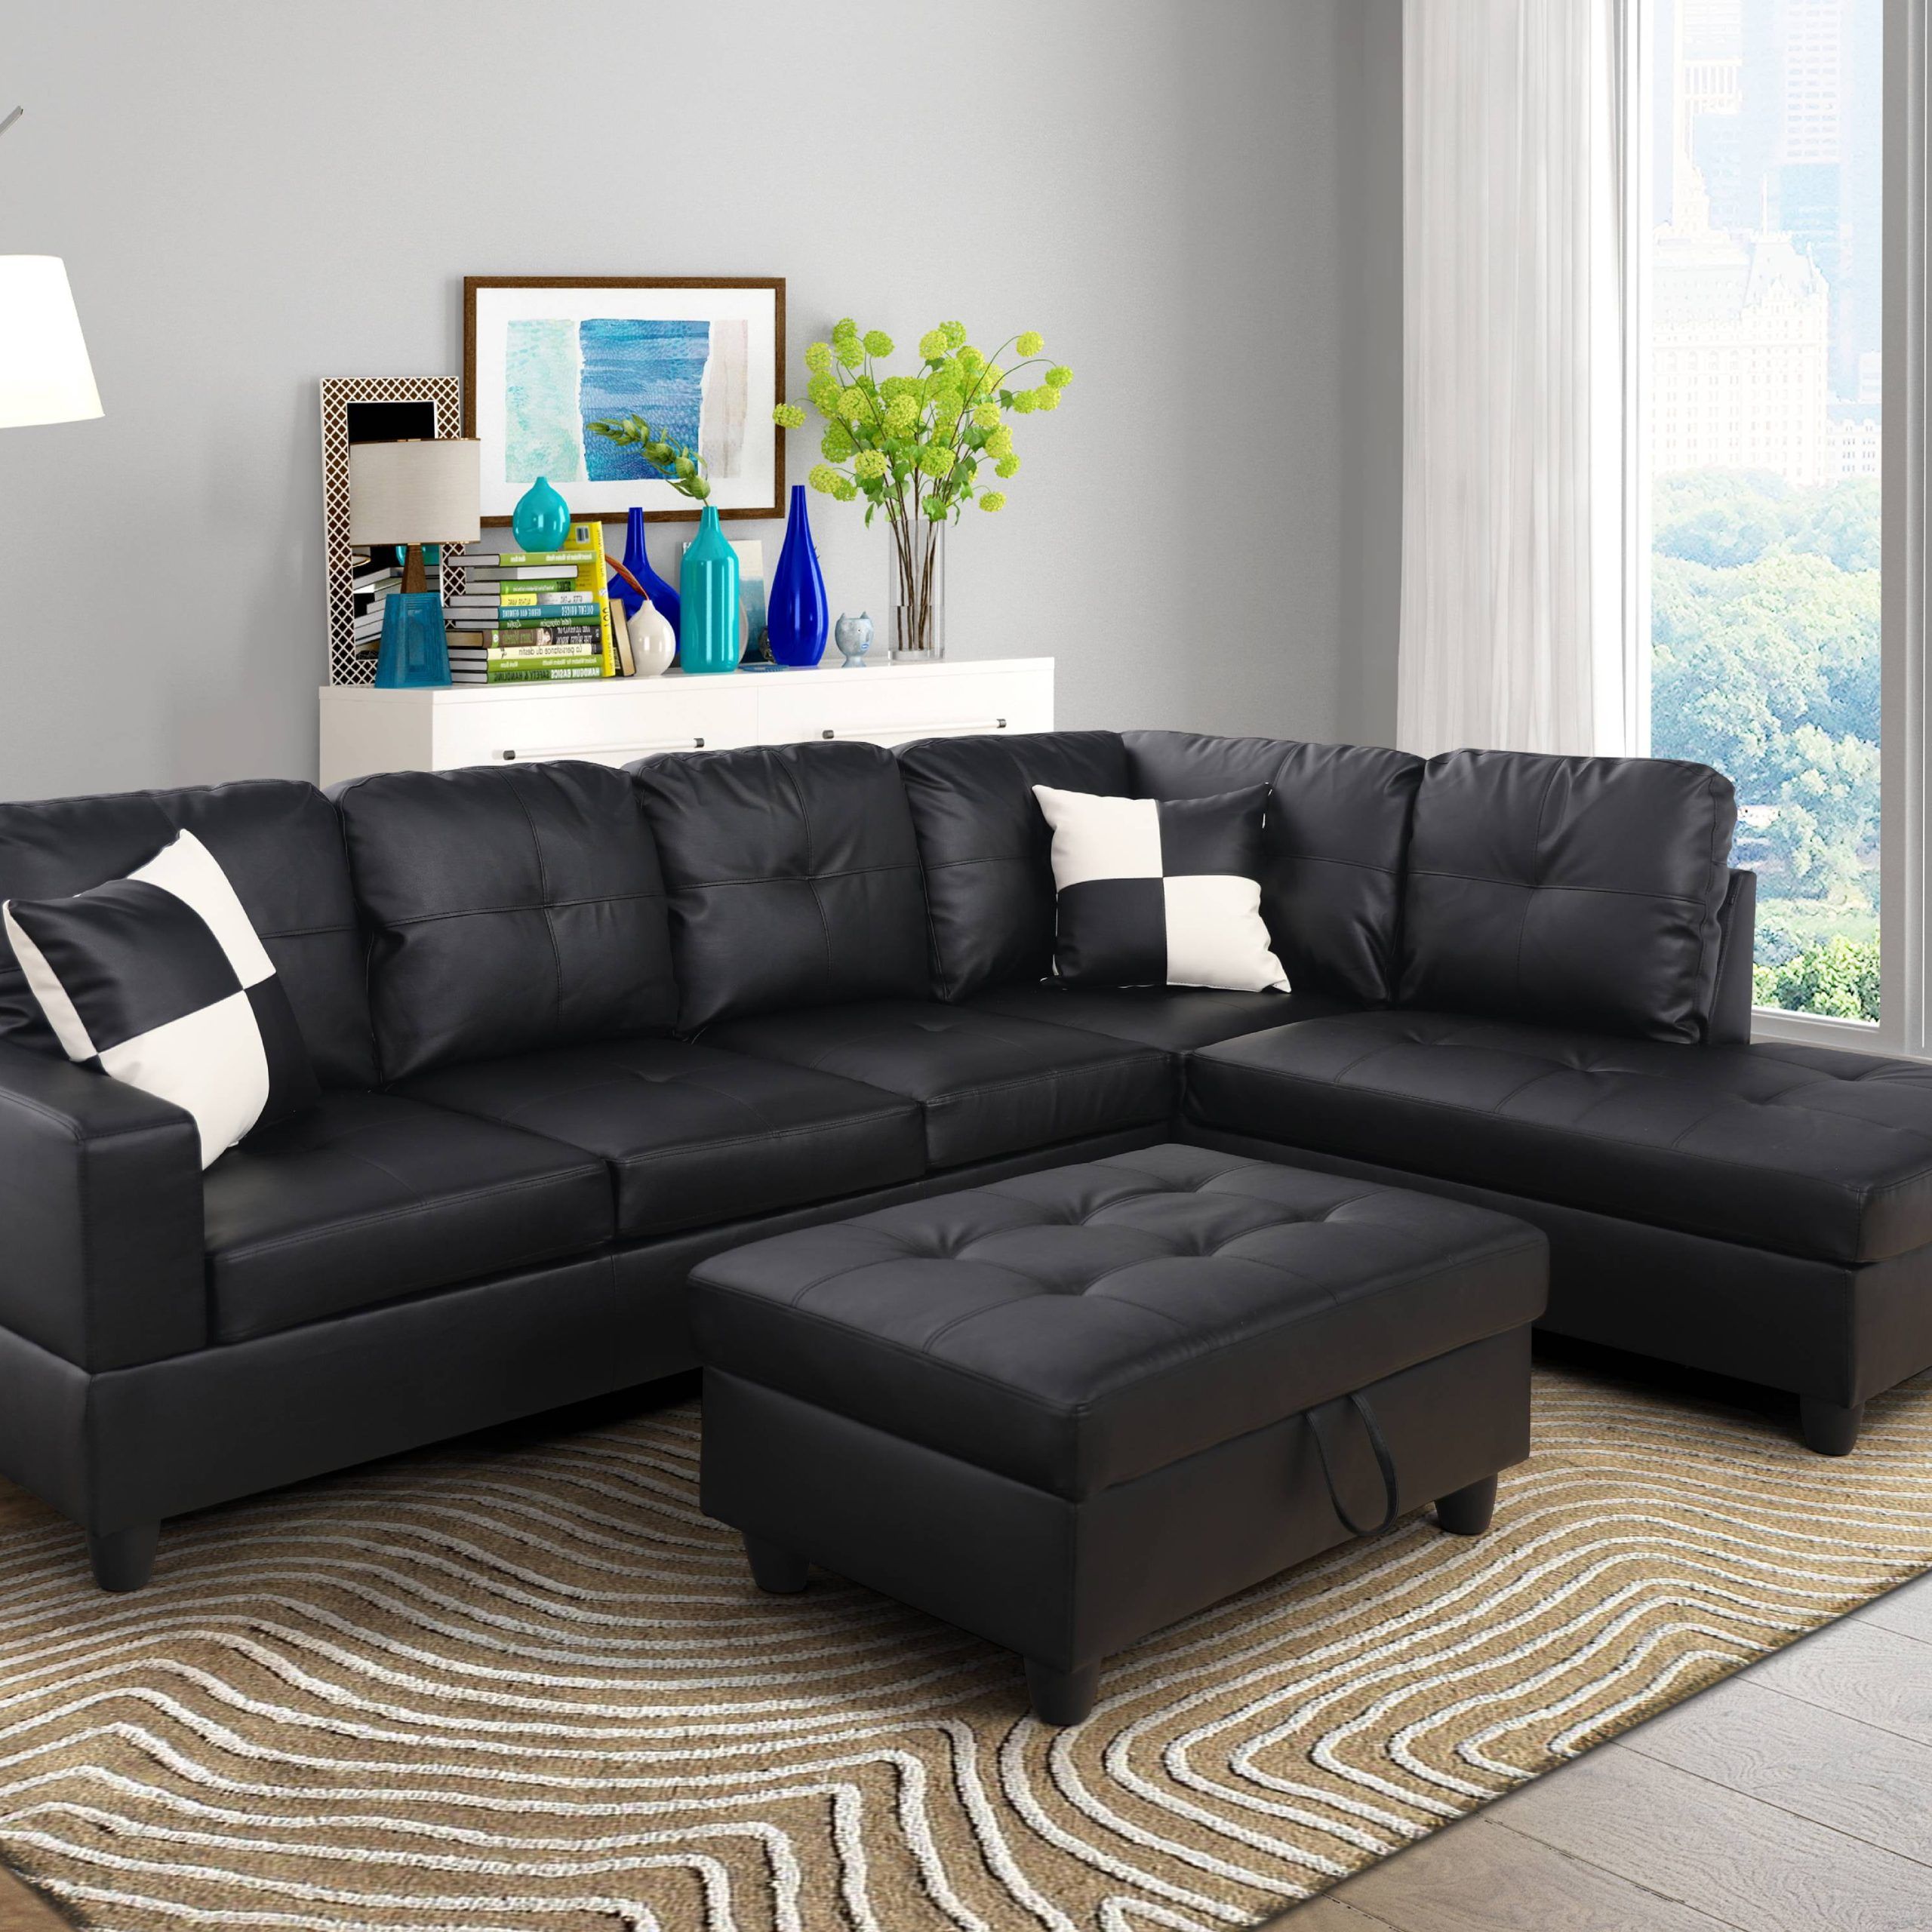 For U Furnishing Classic Black Faux Leather Sectional Sofa, Right Pertaining To Right Facing Black Sofas (Gallery 1 of 20)